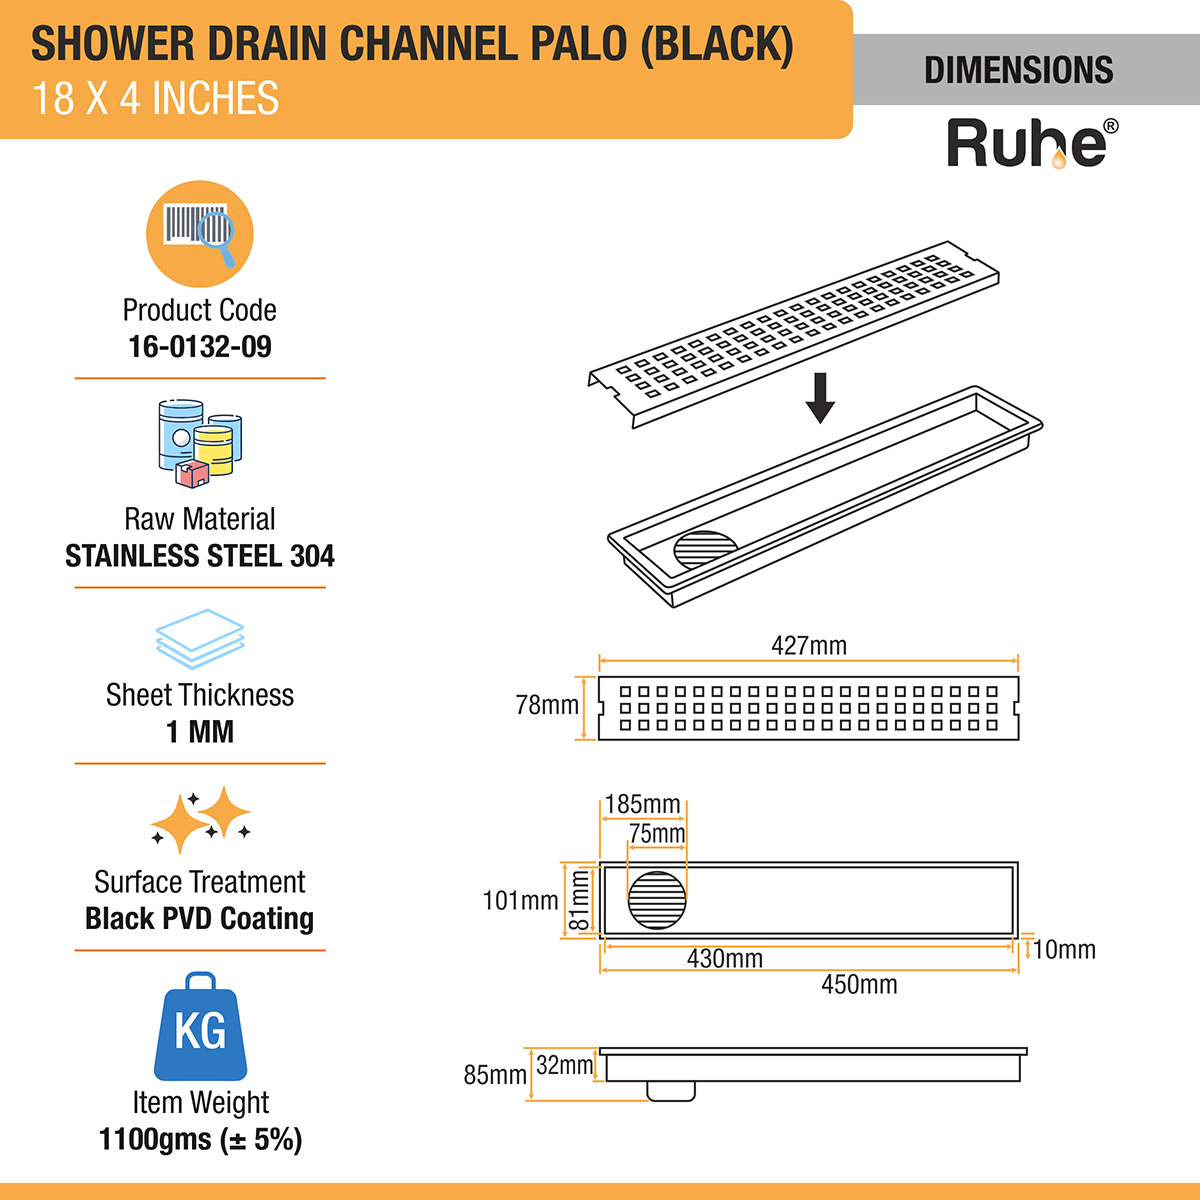 Palo Shower Drain Channel (18 x 4 Inches) Black PVD Coated dimensions and sizes